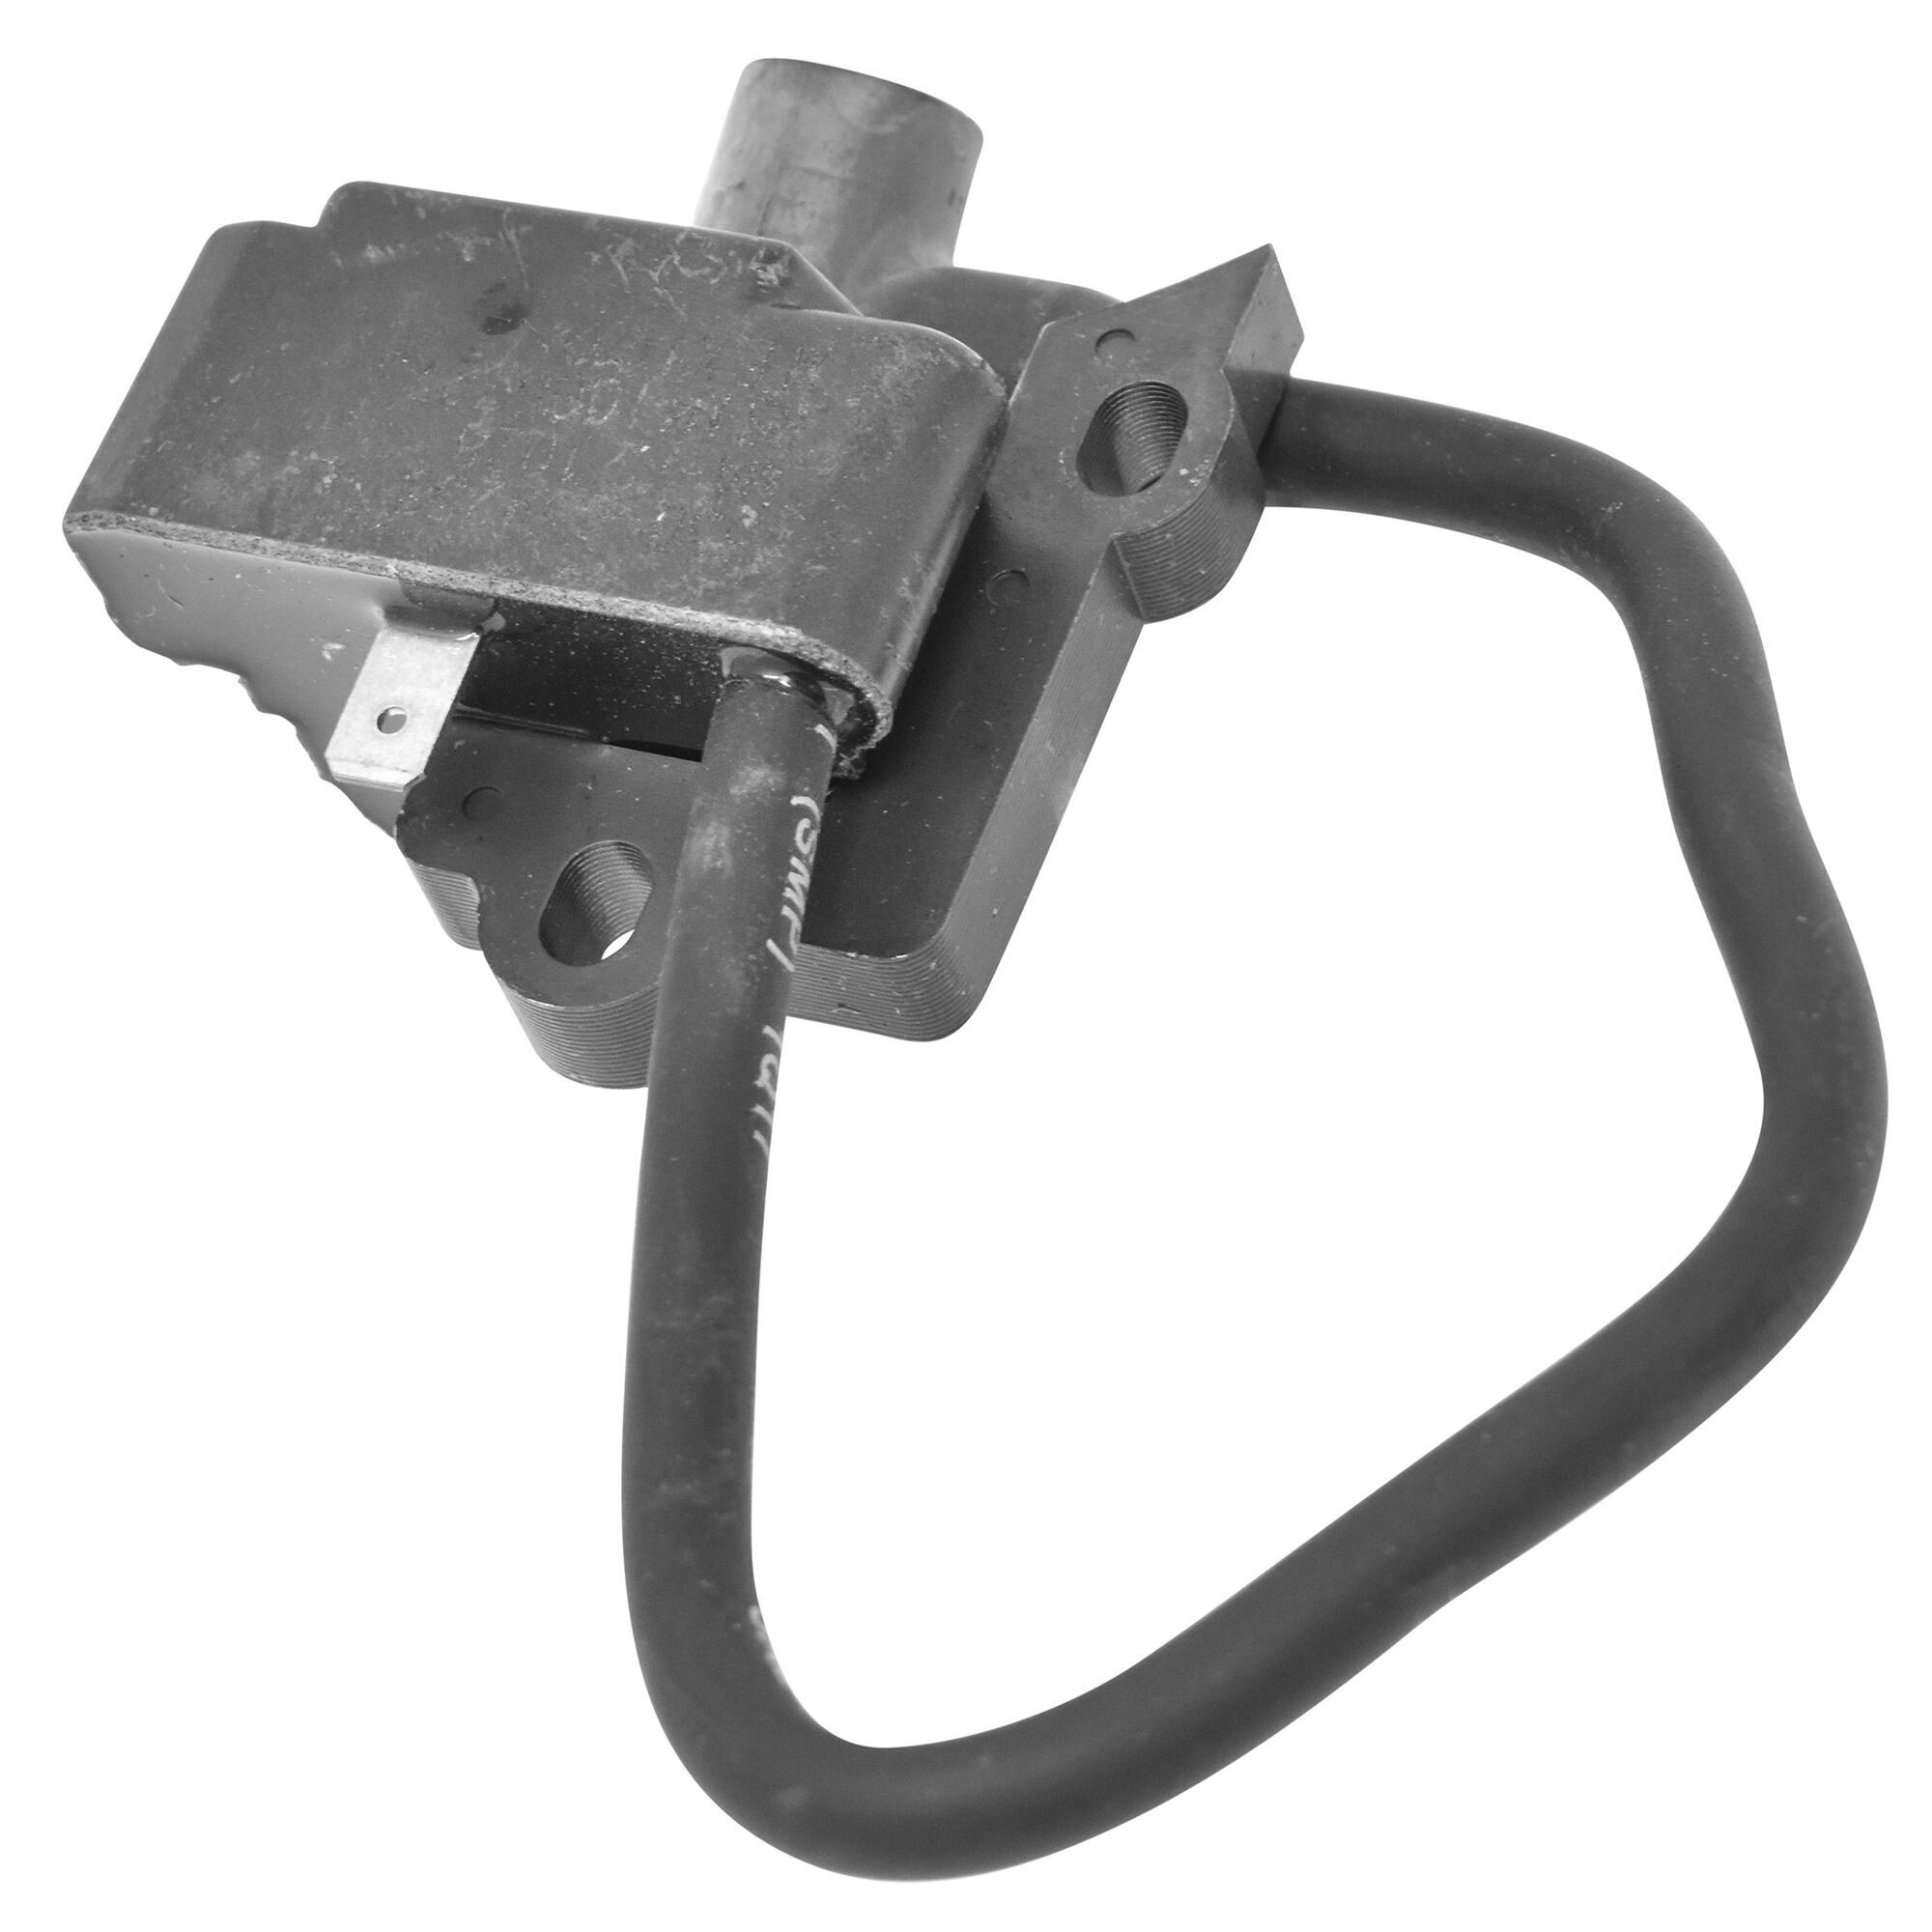 Details about   Ignition Module Coil For McCulloch MAC BL150 MC025 MC125 530039212 530039229 